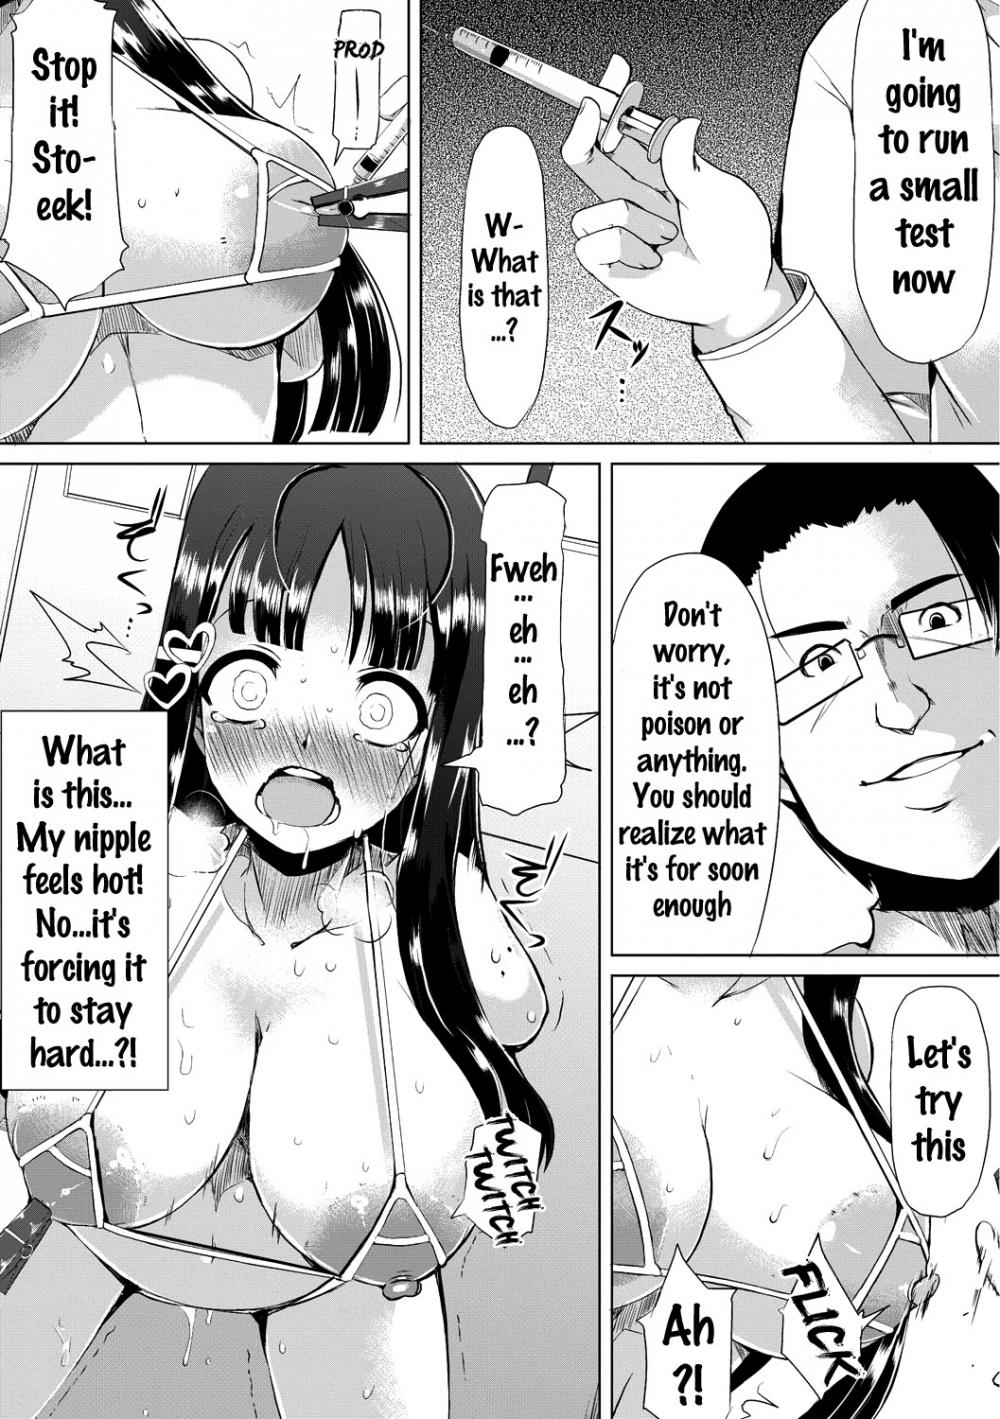 Hentai Manga Comic-A Large Breasted Honor Student Makes The Big Change to Perverted Masochist-Chapter 2-2